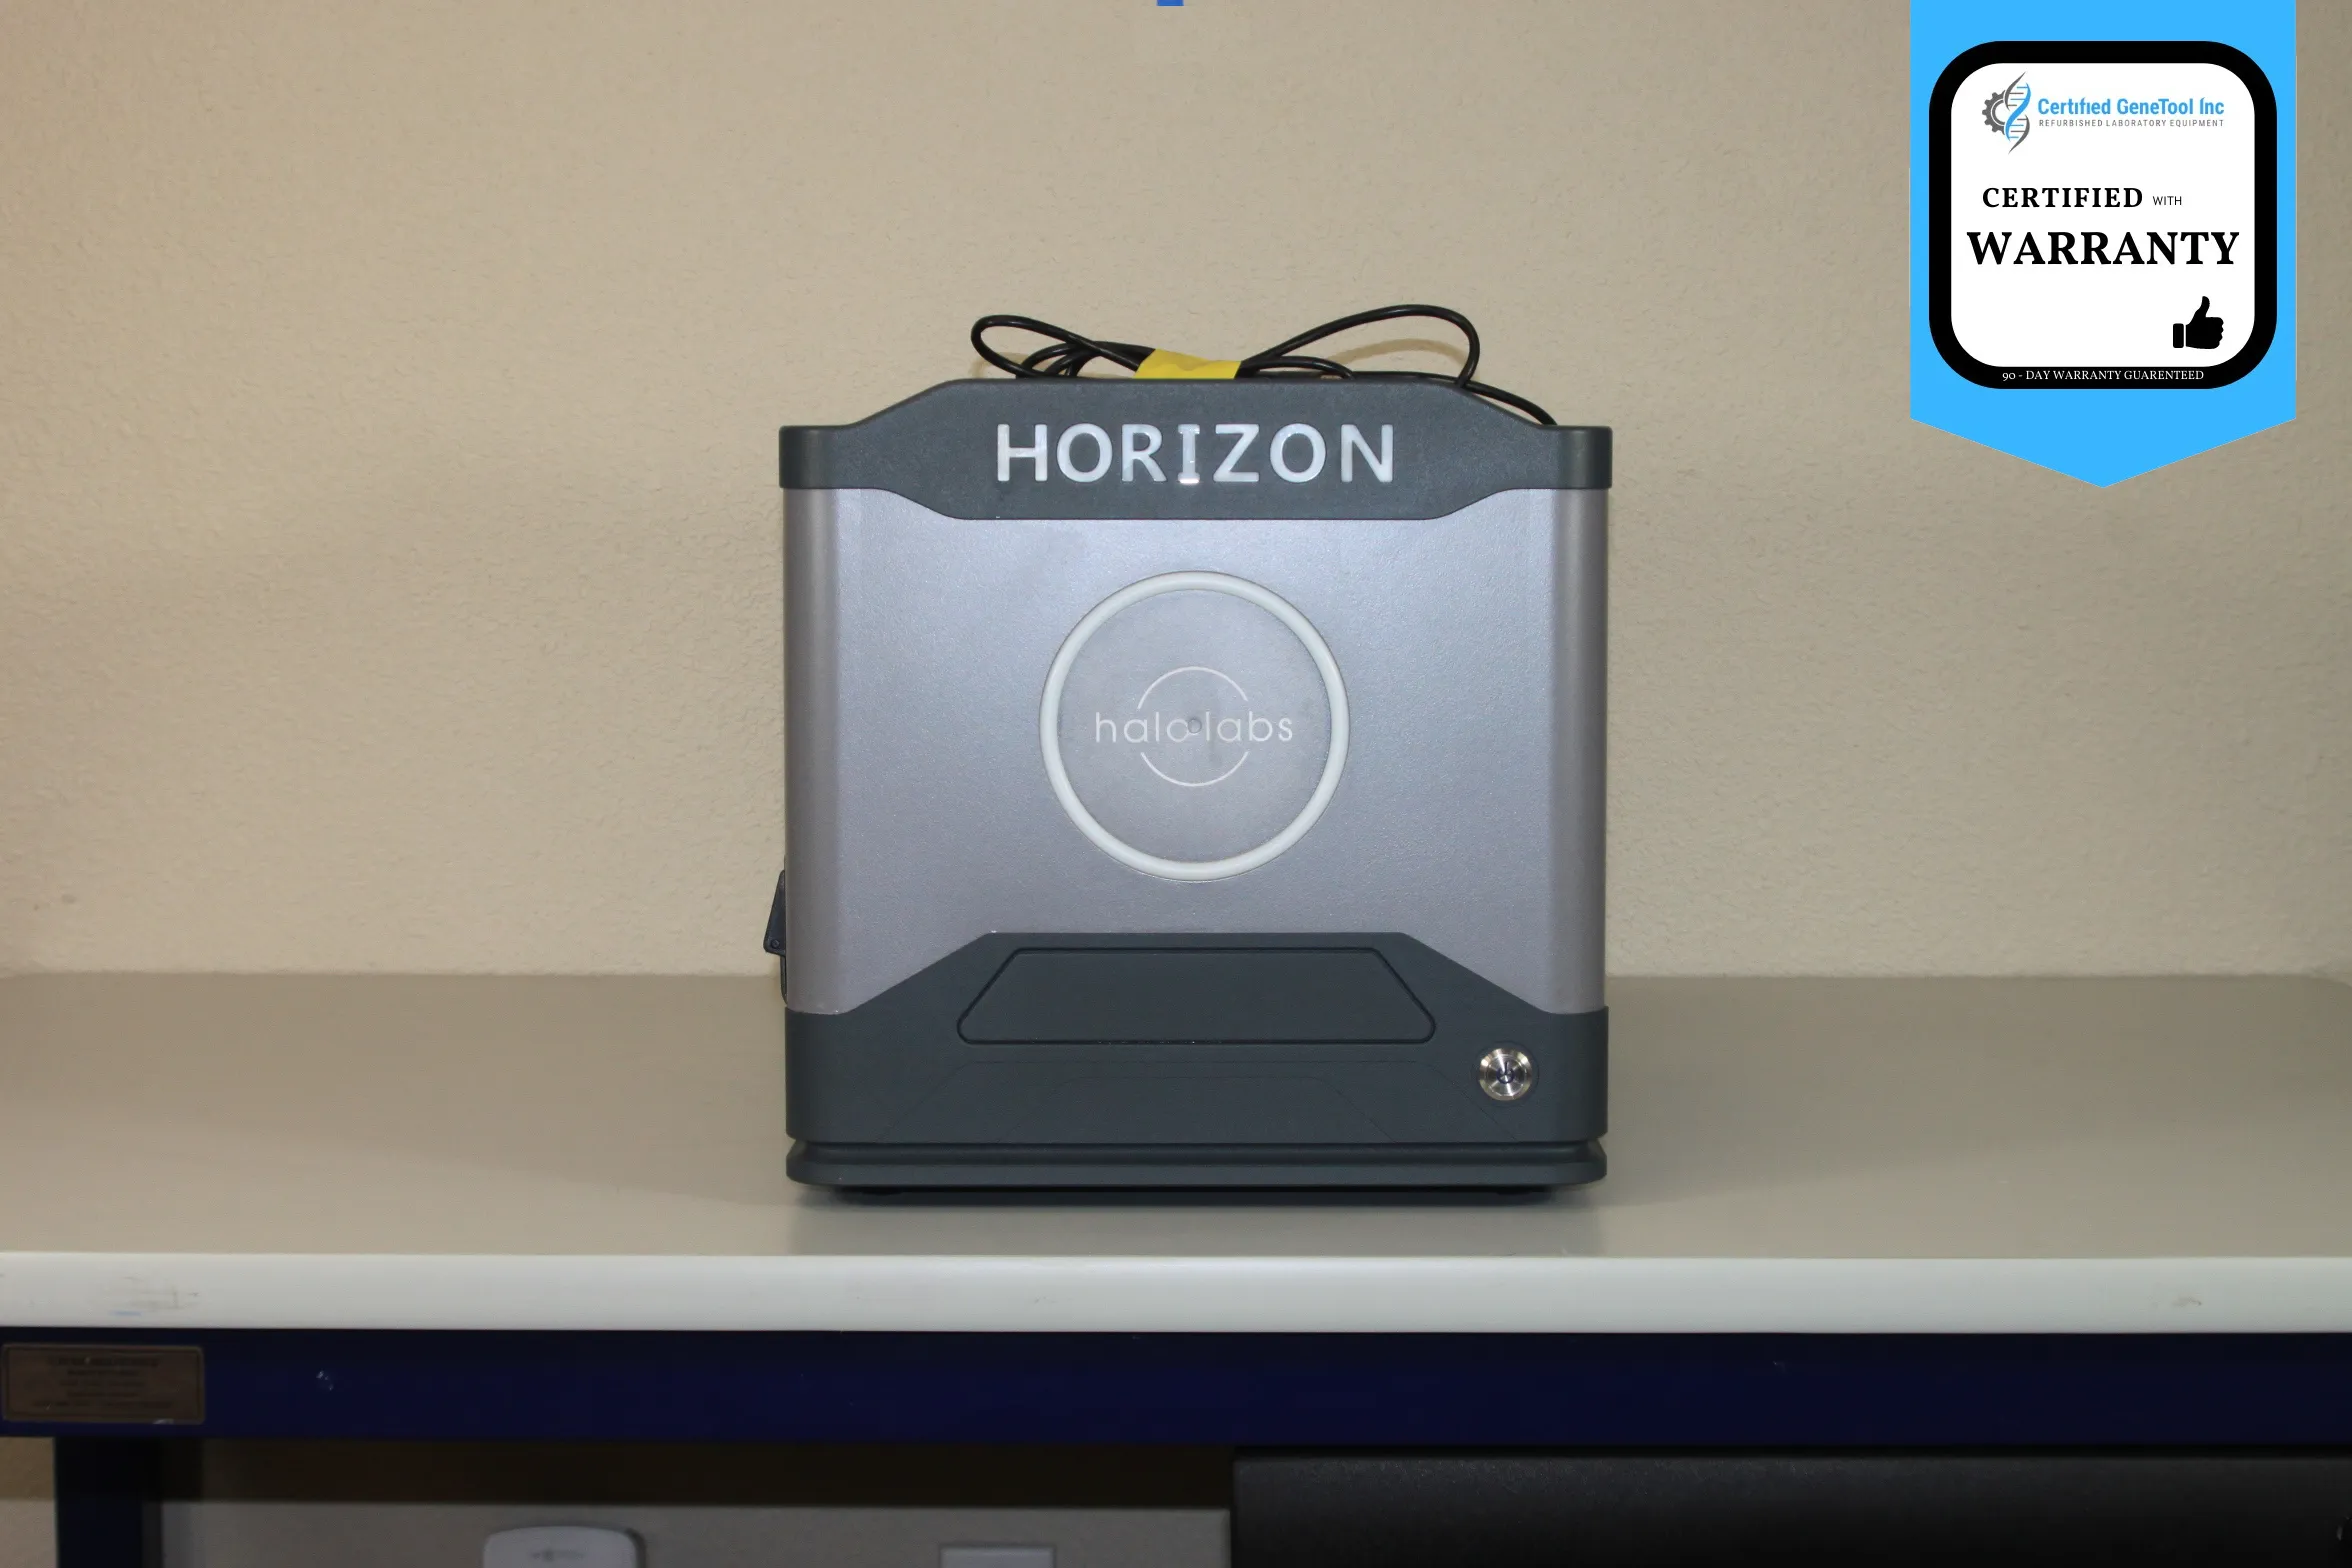 Halo Labs HORIZON Particle Analyzer - Certified with warranty